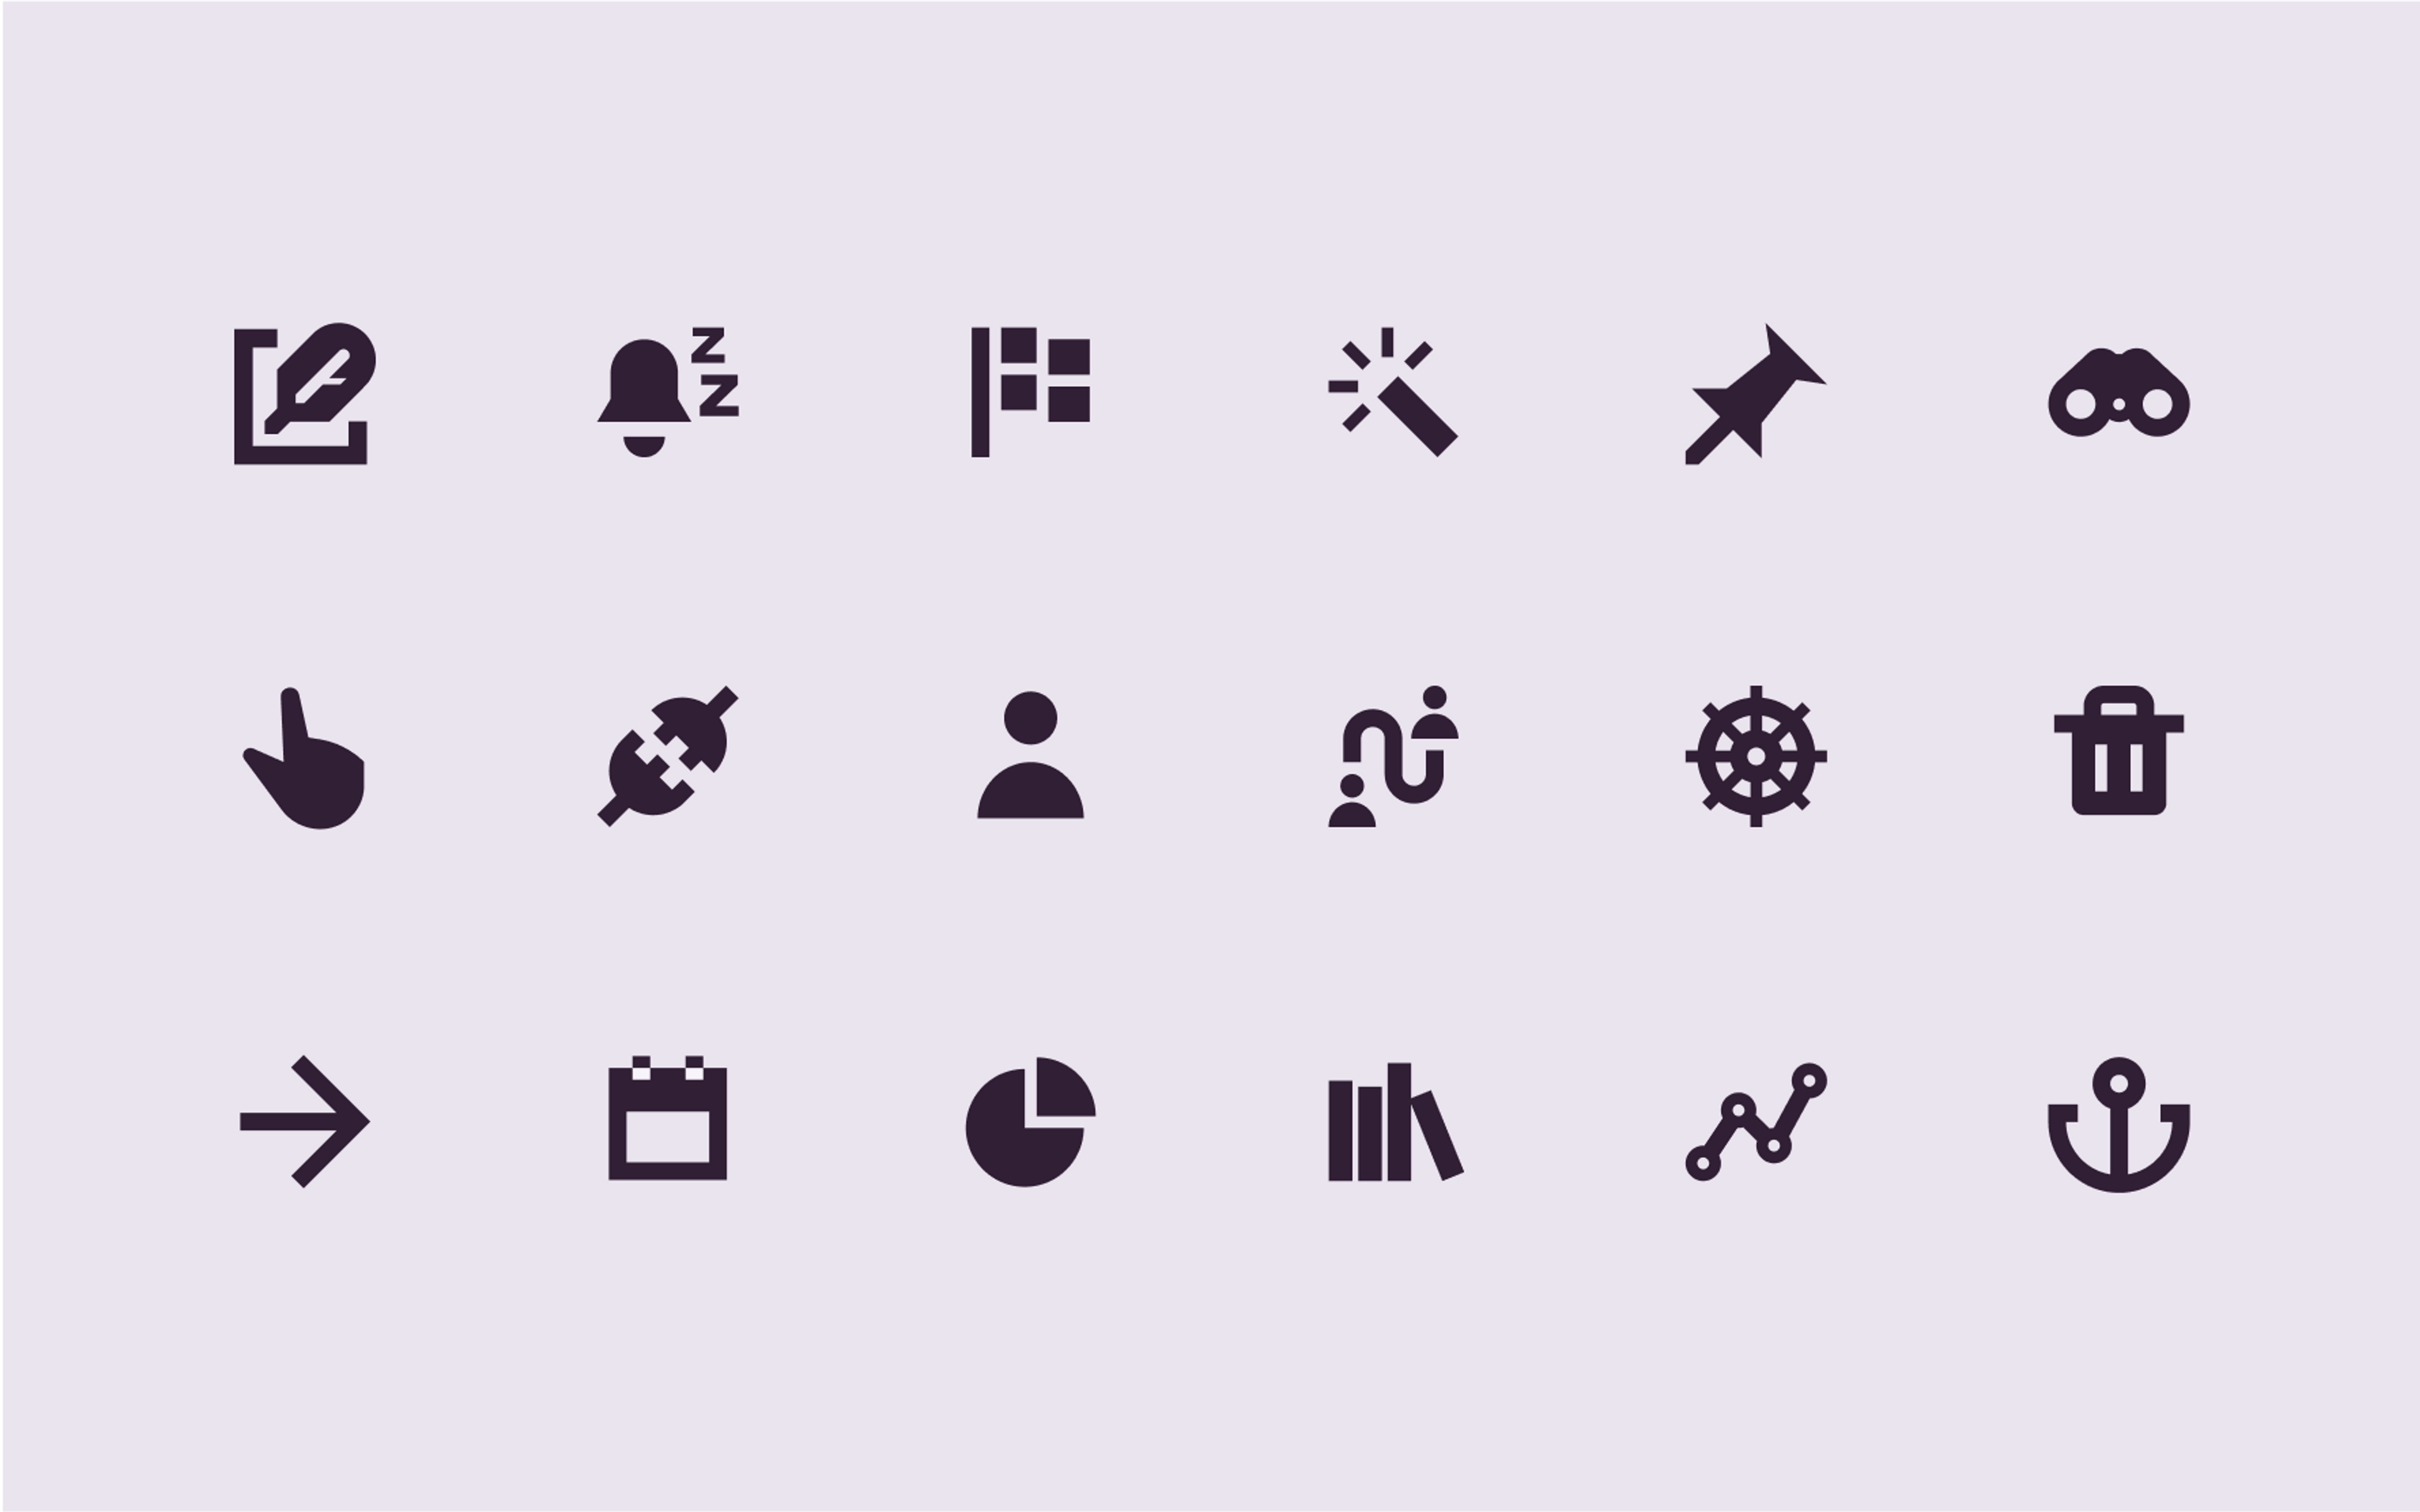 Examples of icons